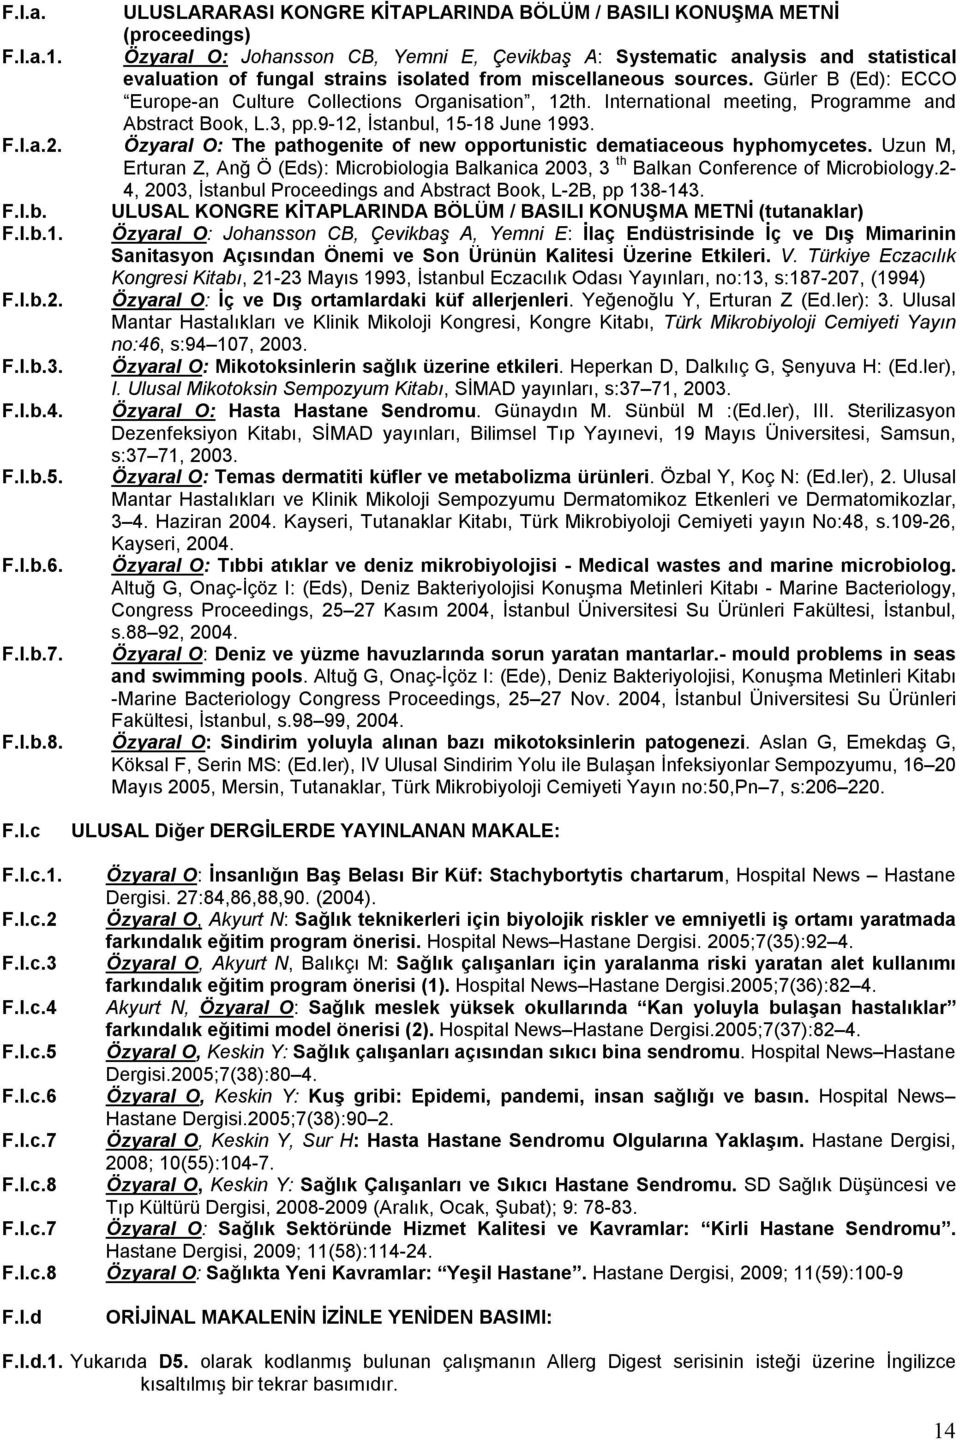 Gürler B (Ed): ECCO Europe-an Culture Collections Organisation, 12th. International meeting, Programme and Abstract Book, L.3, pp.9-12, İstanbul, 15-18 June 1993. F.I.a.2. Özyaral O: The pathogenite of new opportunistic dematiaceous hyphomycetes.